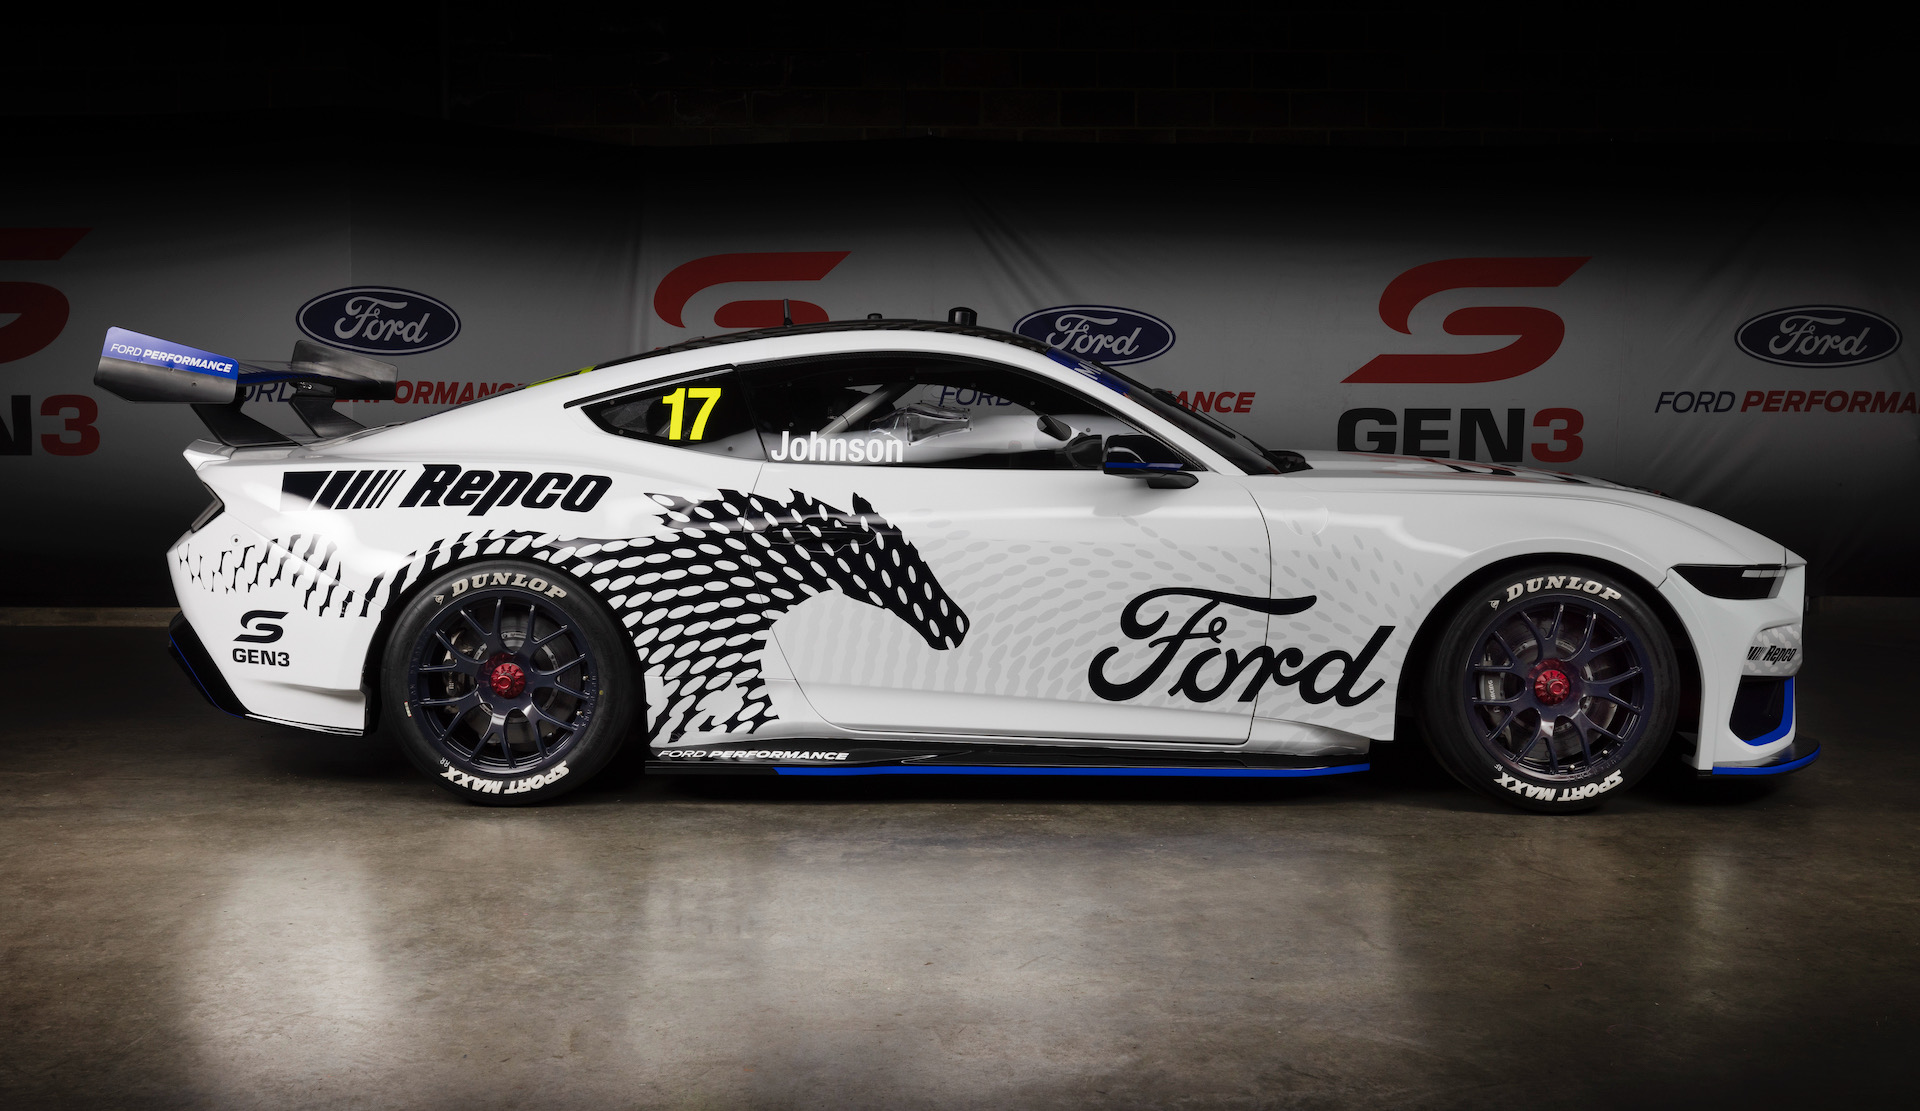 2023 Ford Mustang GT Supercars 'Gen3' race car revealed at Bathurst